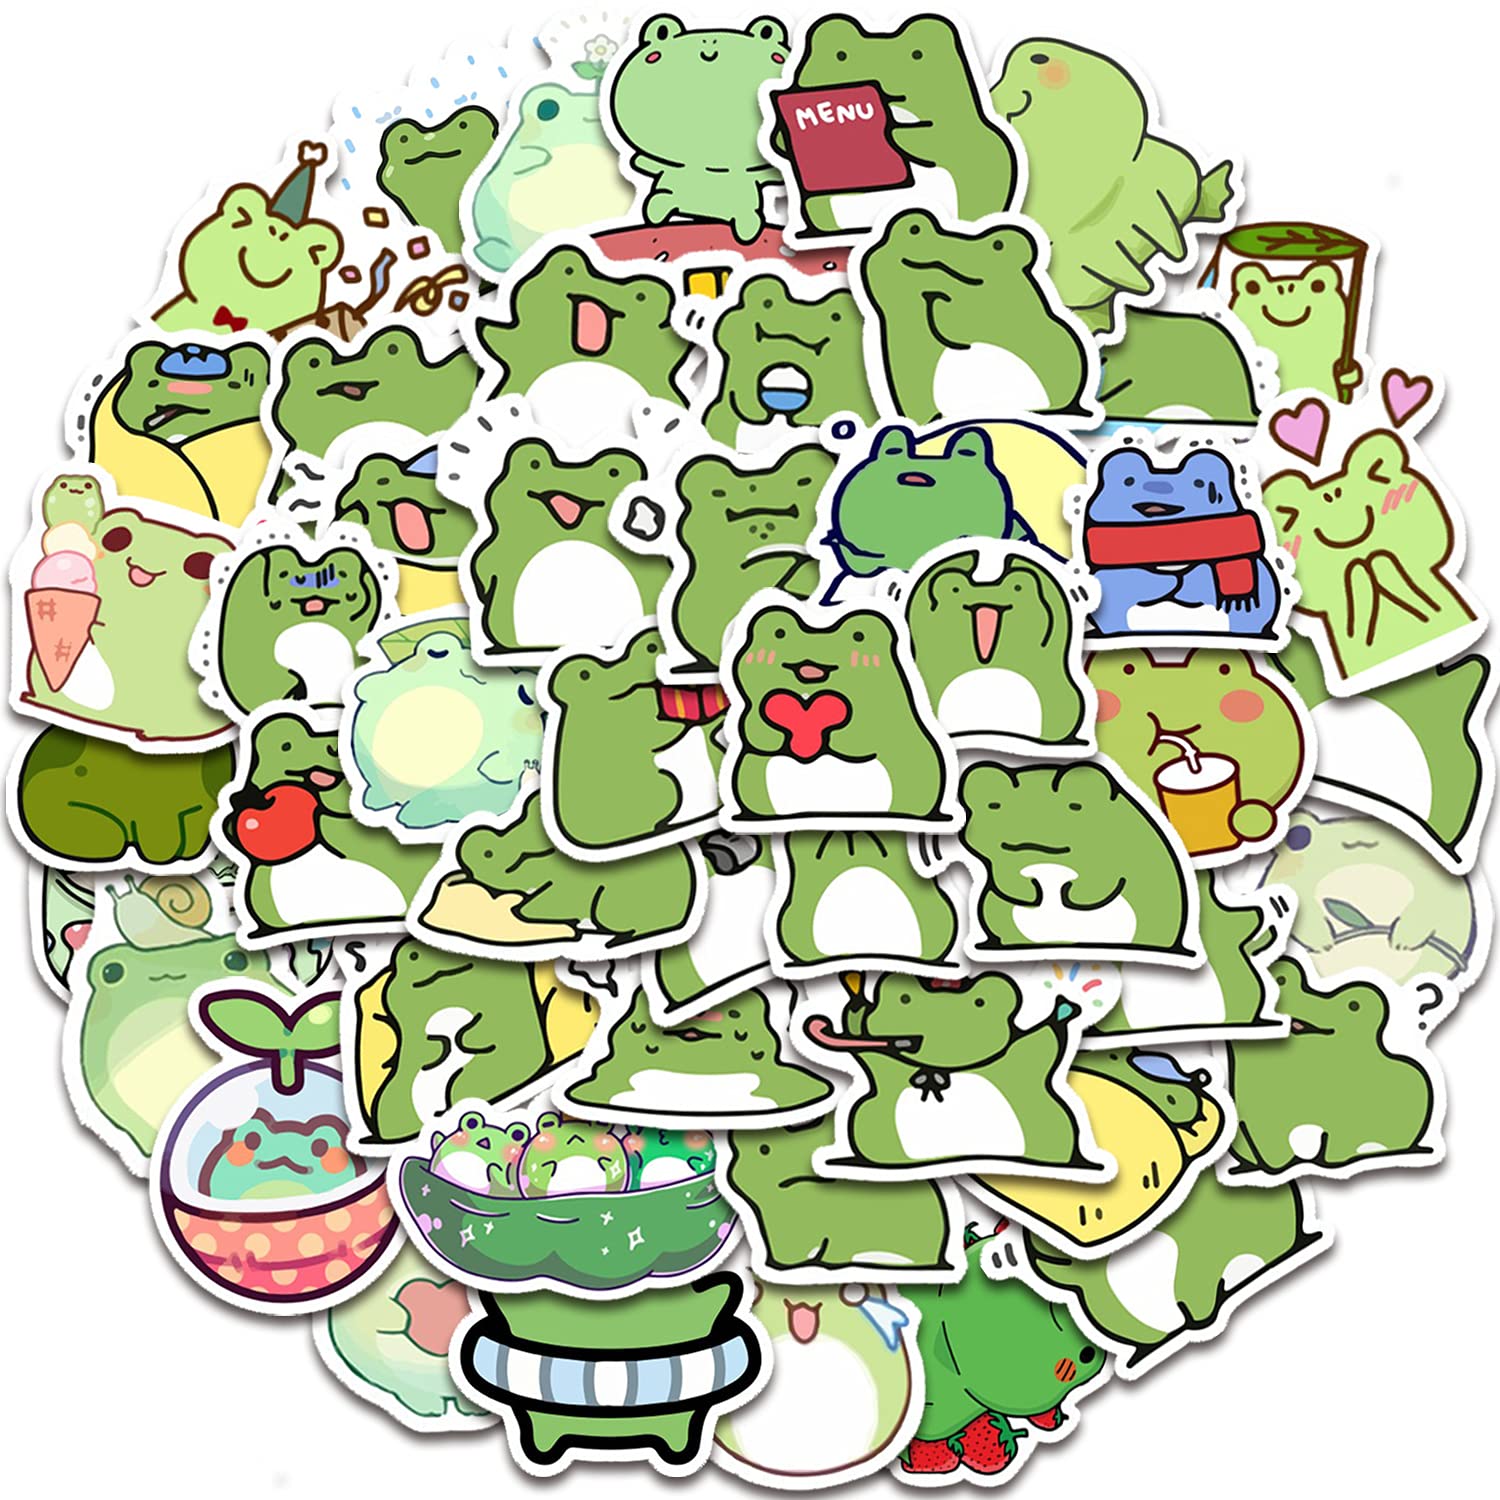 50 Pieces Frog Stickers Cartoon Vinyl Waterproof Stickers for Laptop,Guitar,Motorcycle,Bike,Skateboard,Luggage,Phone,Hydro Flask, Gift for Kids Teen Birthday Party